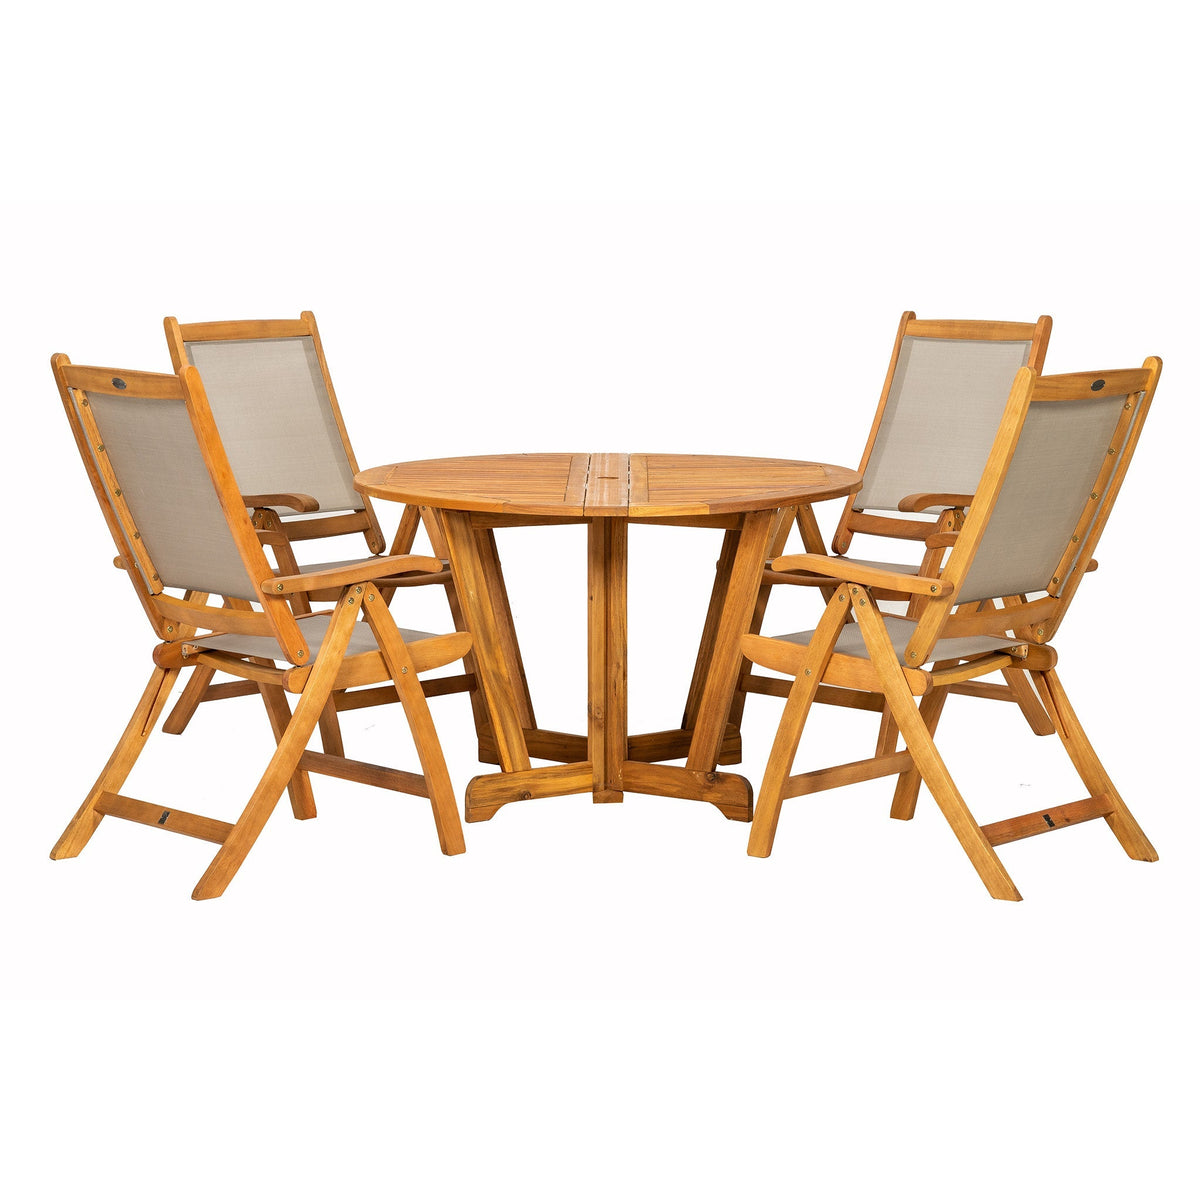 Henley Acacia Wooden 4 Seat Dining Set from Roseland Home Furniture